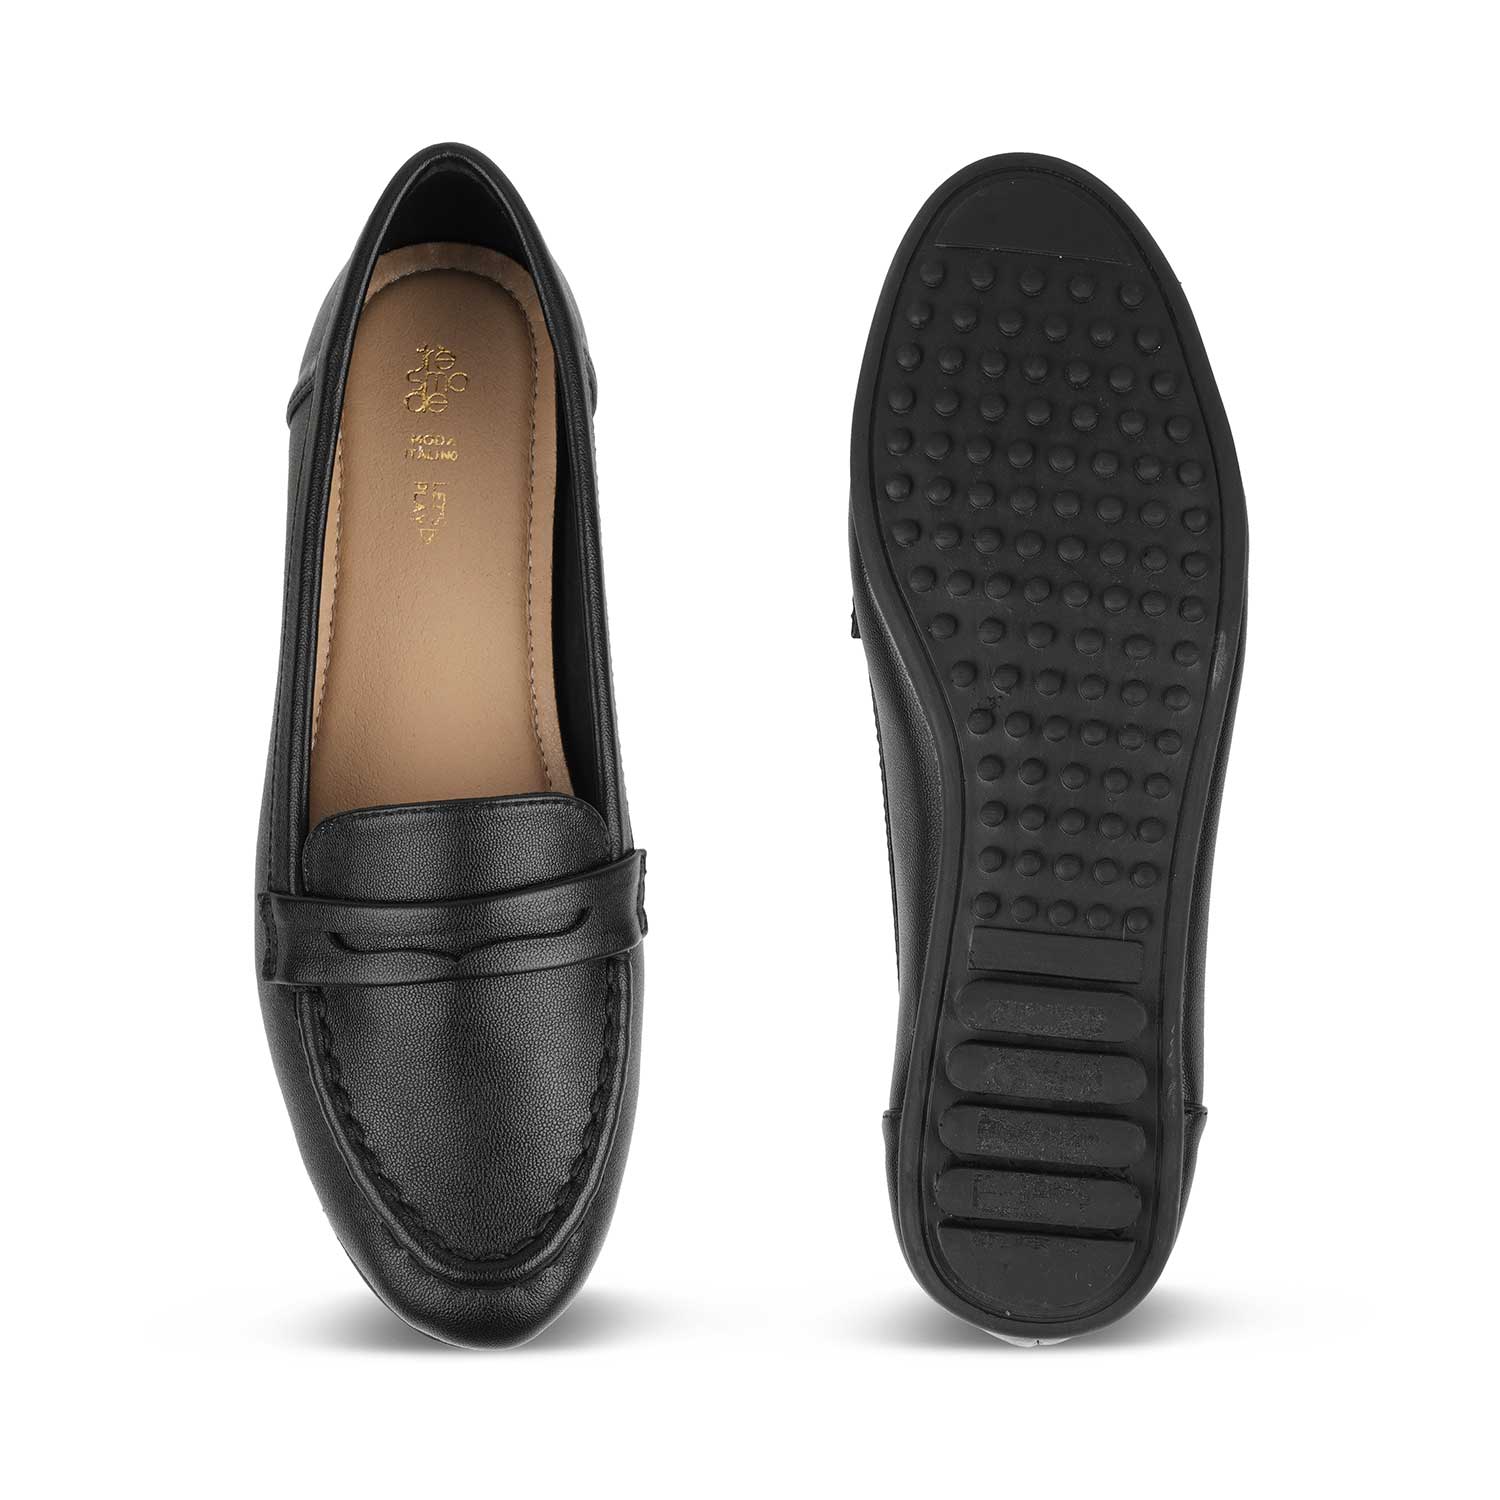 The Snap Black Women's Casual Loafers Tresmode